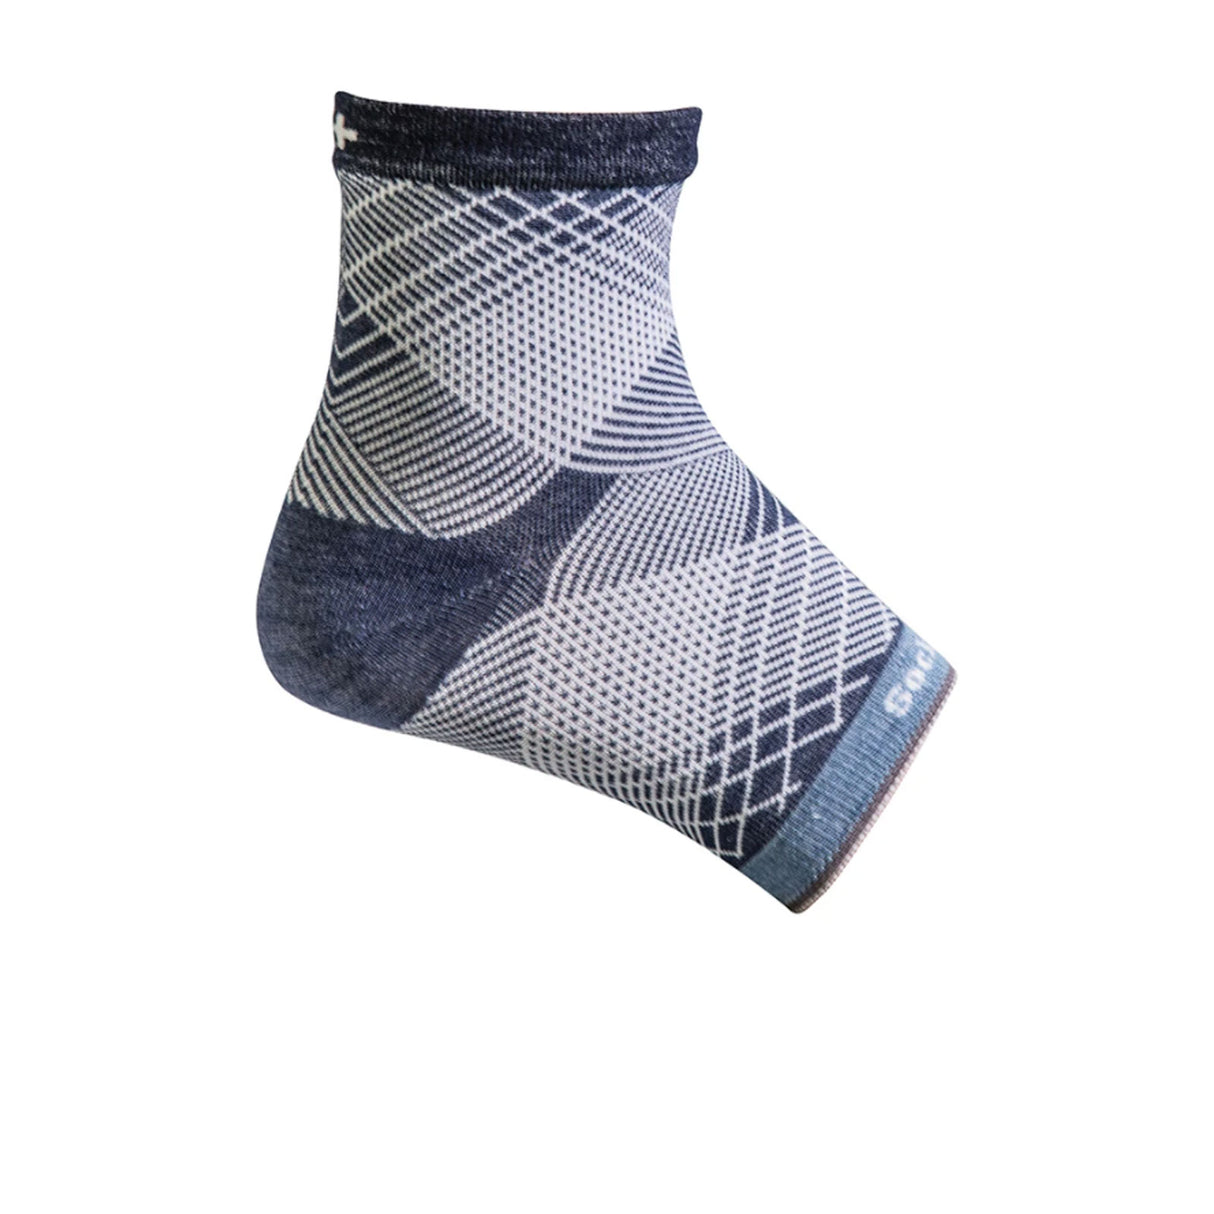 Sockwell Plantar Compression Sleeve (Women) - Denim Accessories - Socks - Compression - The Heel Shoe Fitters